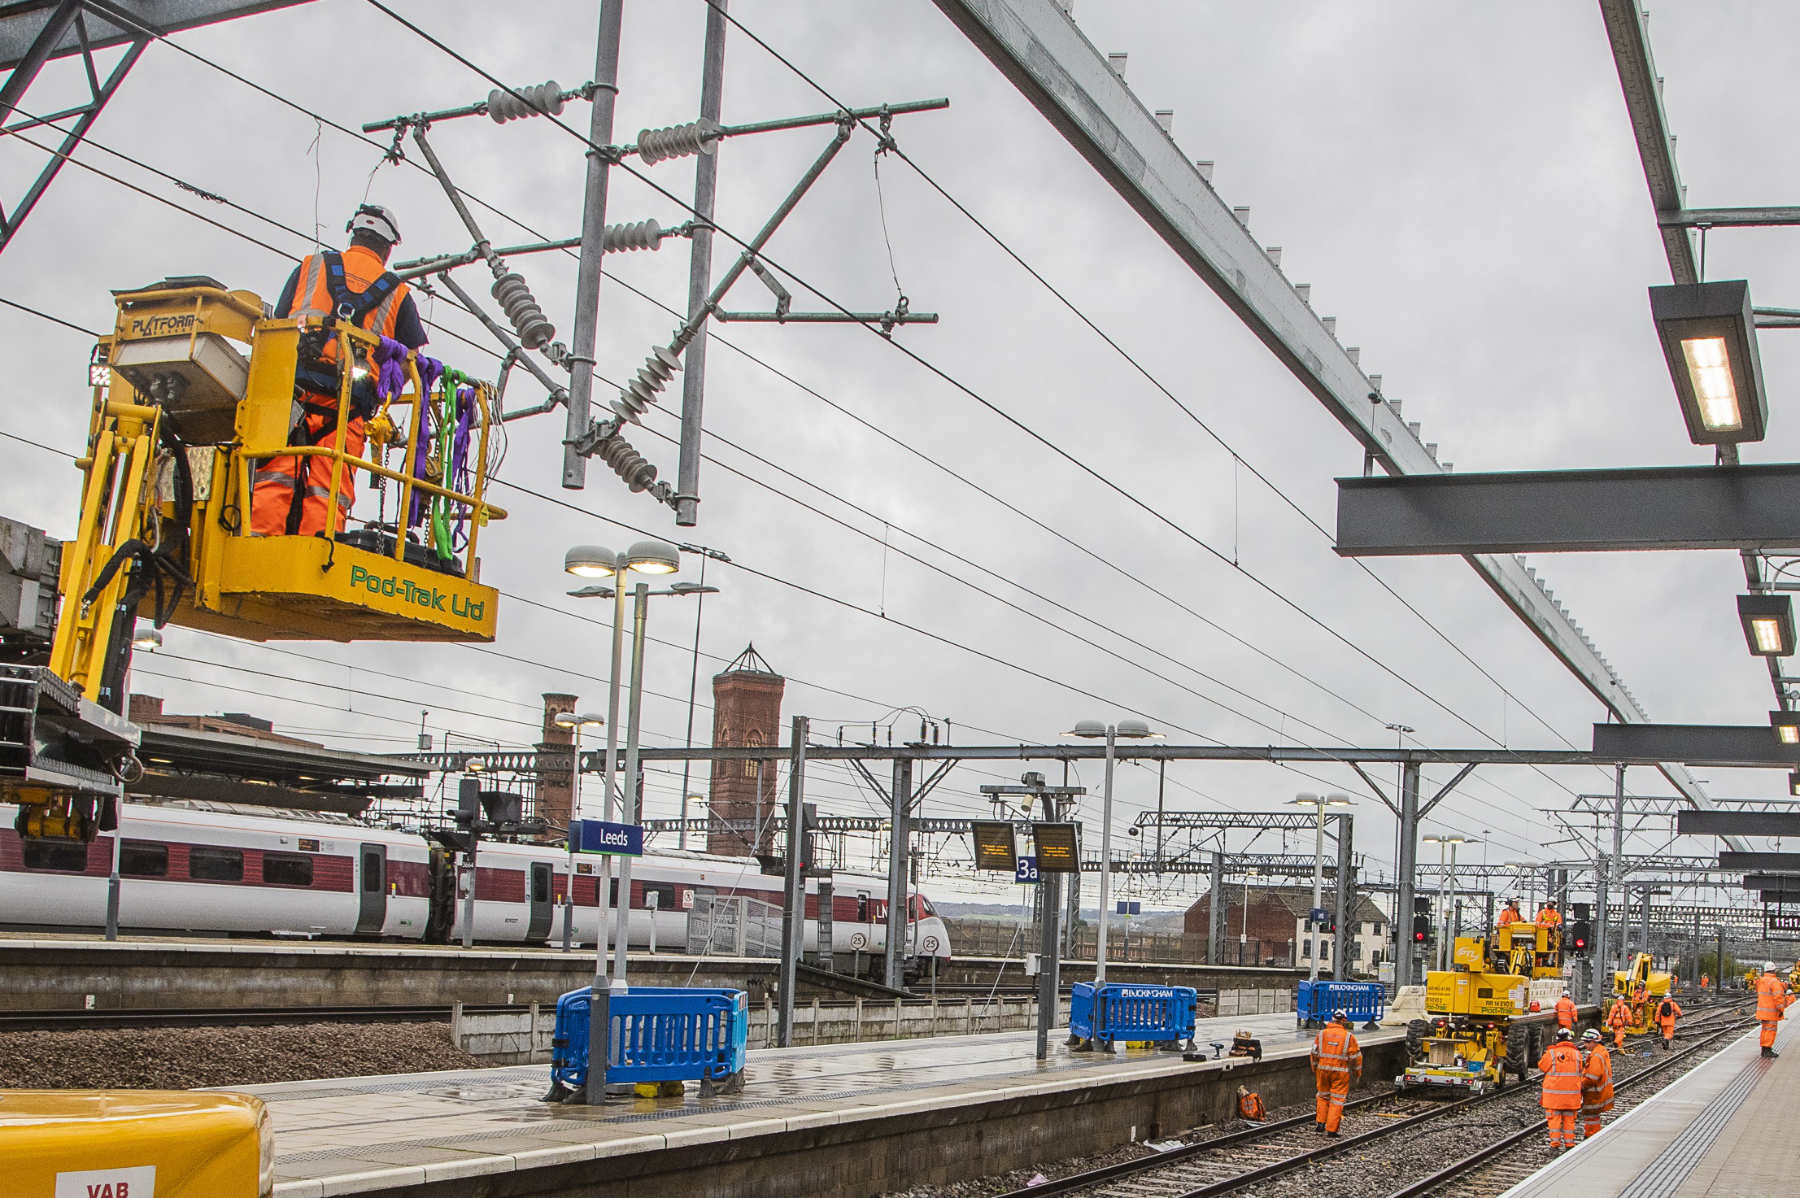 Network Rail, work on overhead lines and images of progress of work on new platforms - 31 October 2020